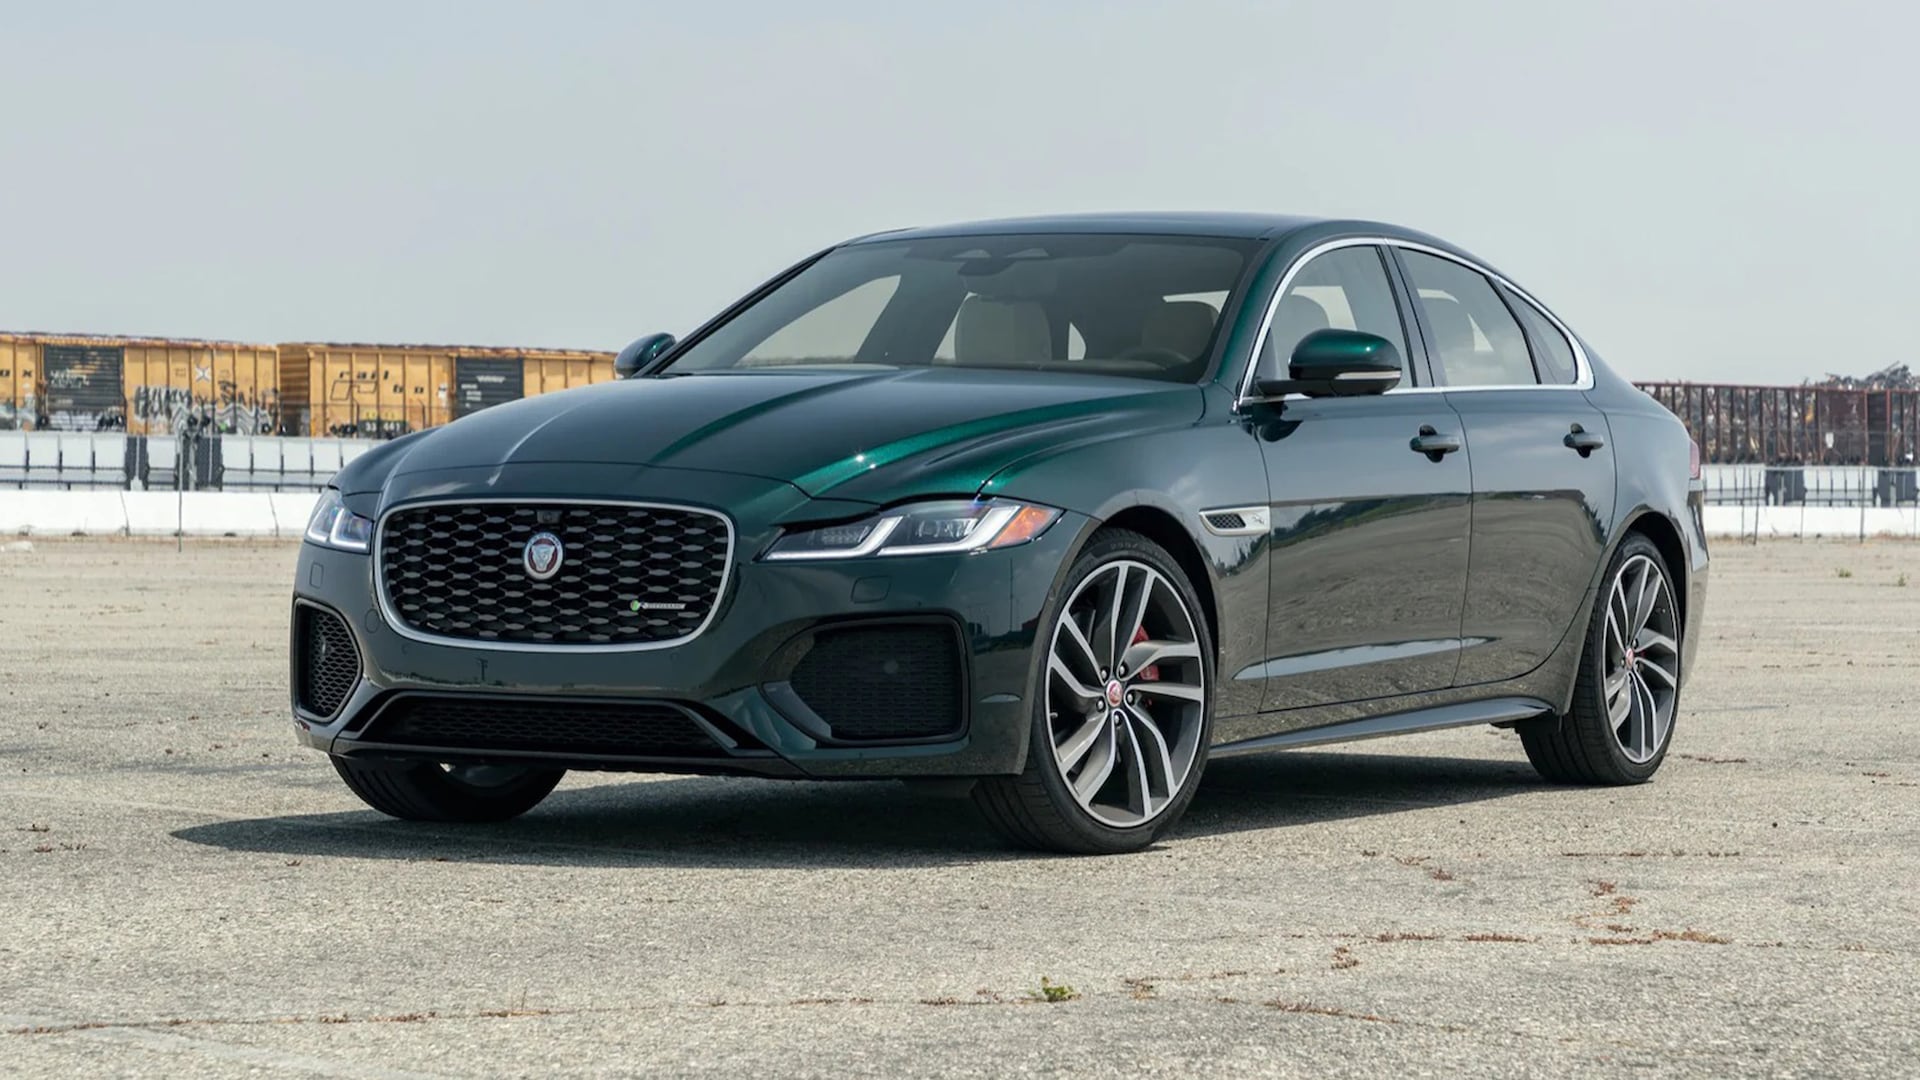 2023 Jaguar XF Prices, Reviews, and Photos - MotorTrend